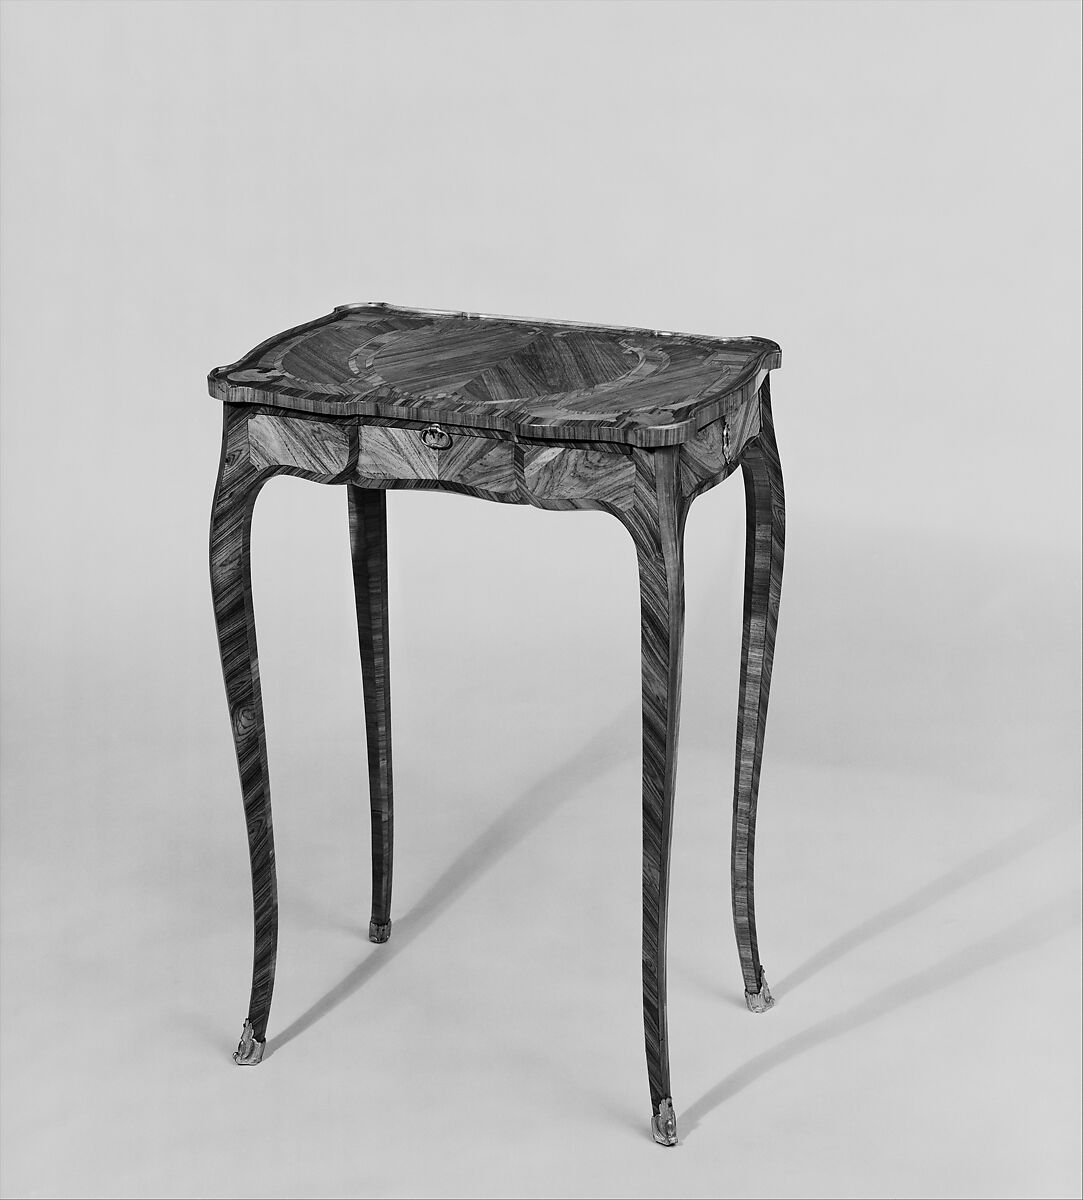 Small rectangular table, Léonard Boudin (French, 1735–1807, master 1761), Oak and pine carcass with tulipwood and kingwood veneer; leather and brass, French, Paris 